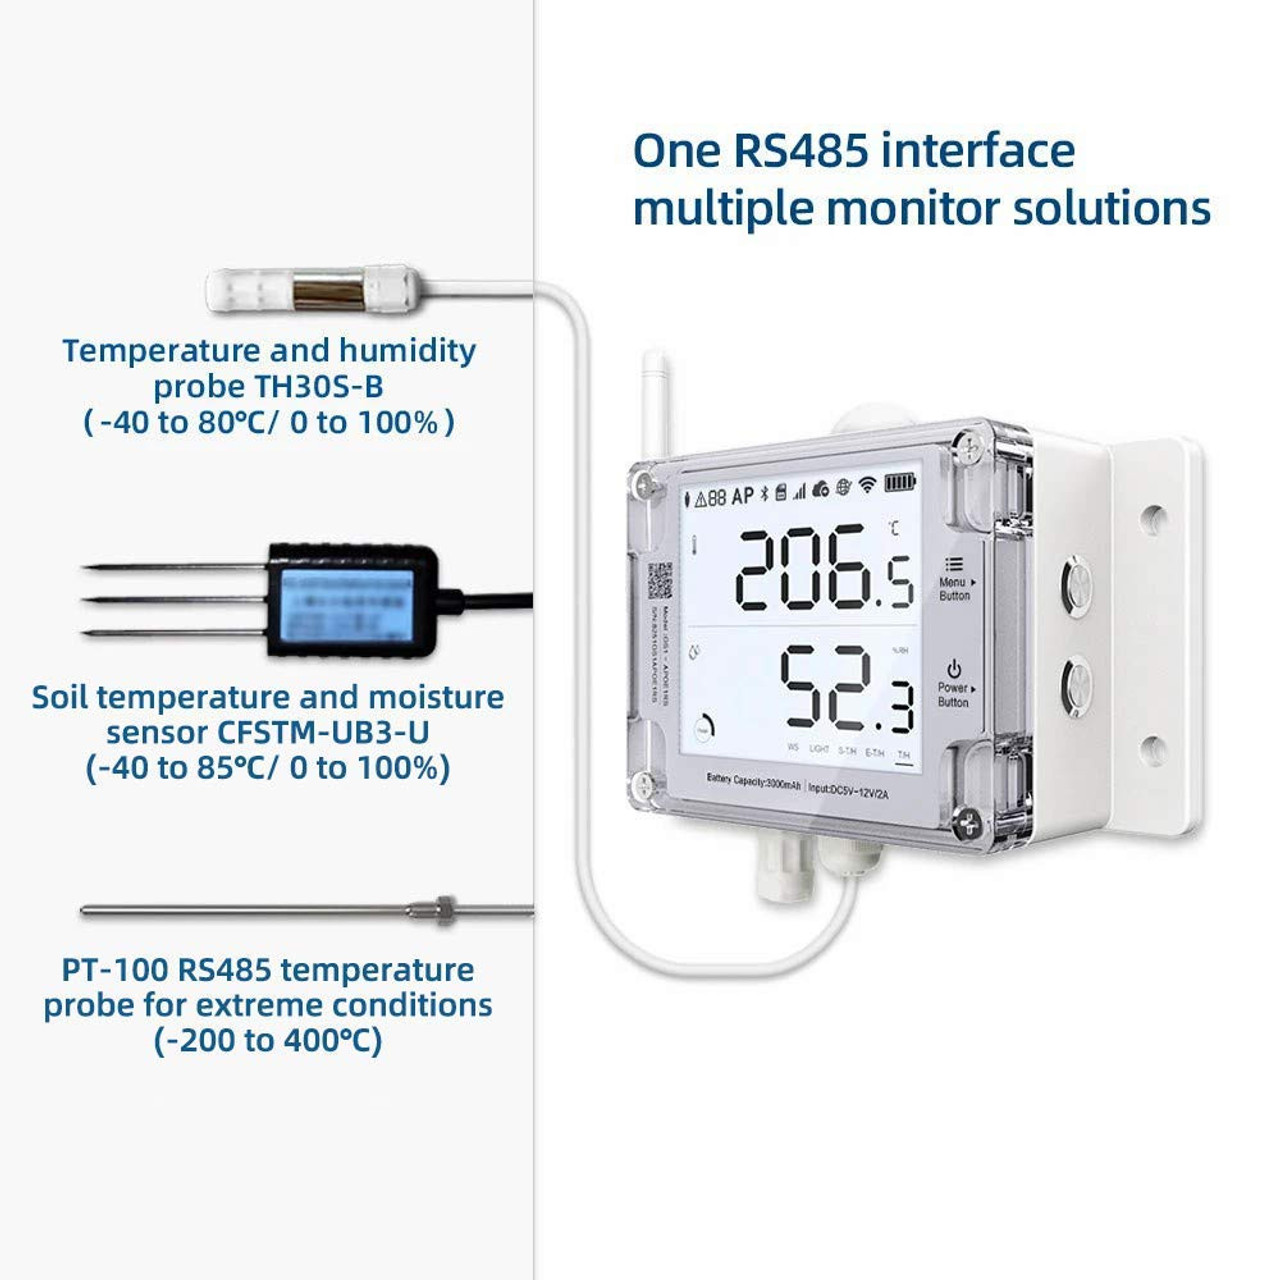 GS1 Industrial Grade WiFi or 4G Temperature, Humidity Data Logger/Remote  Environmental Monitoring System with Display